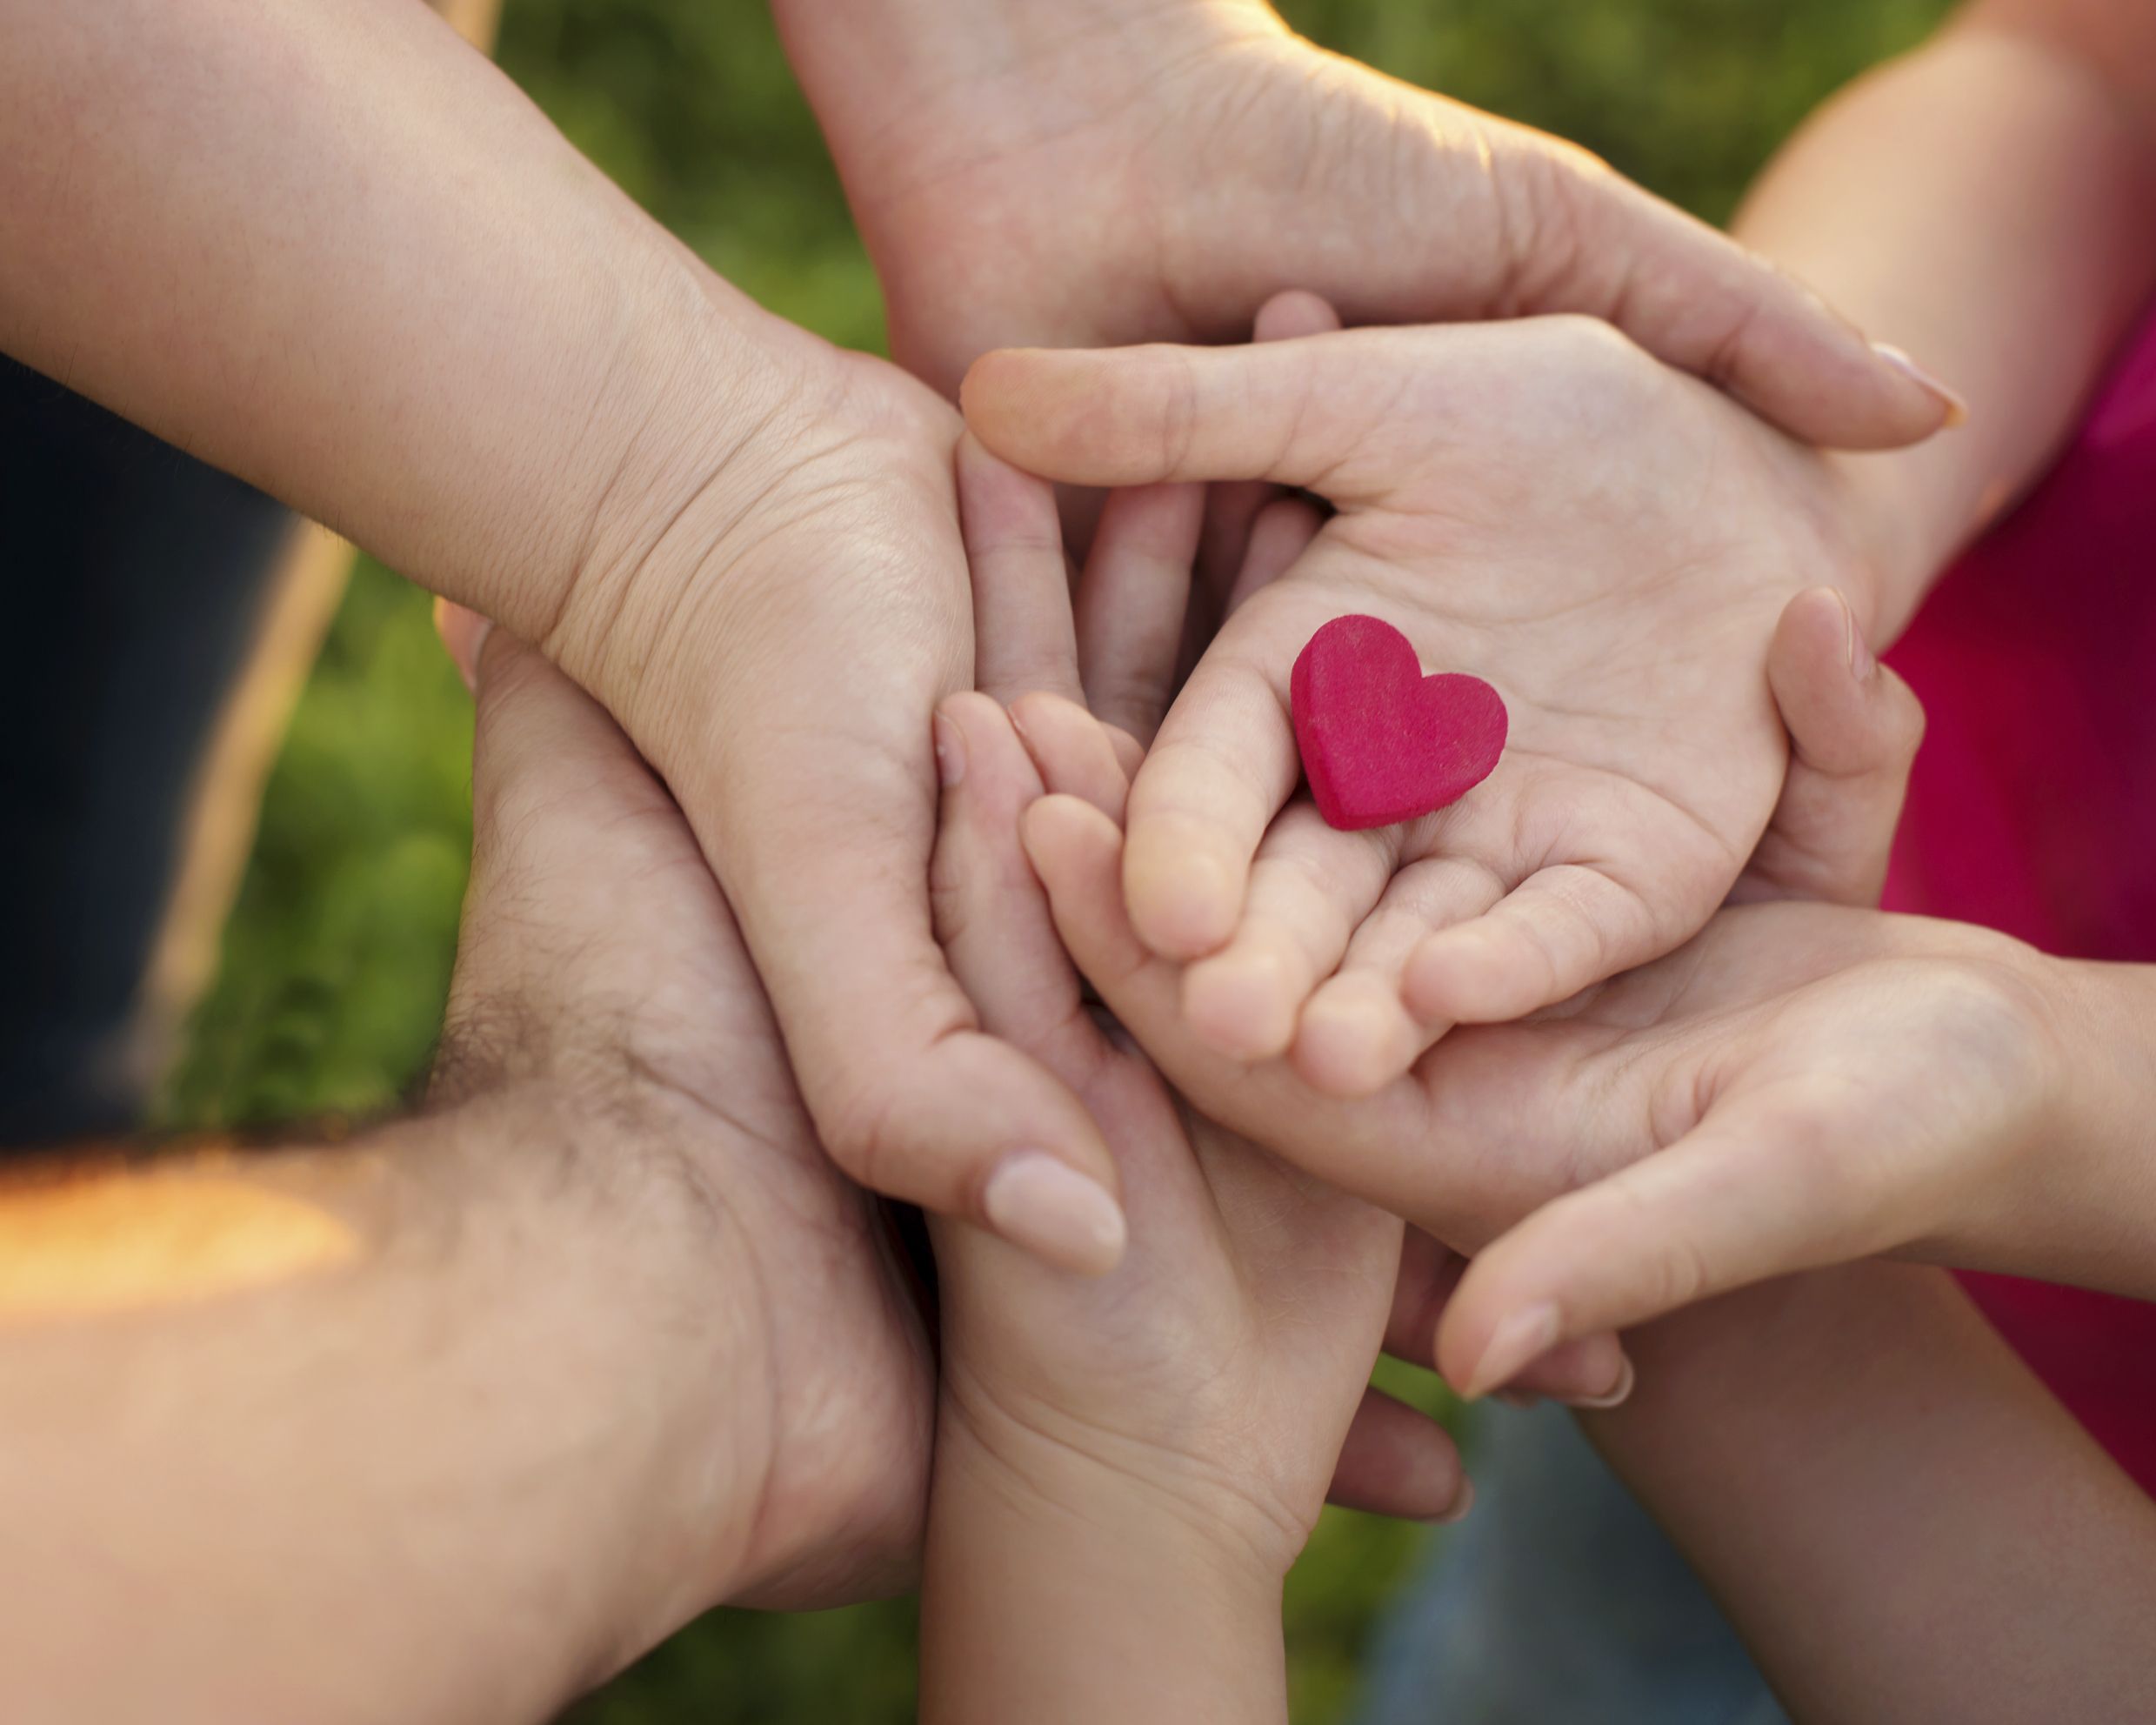 Family unity and love begins with conscious parenting